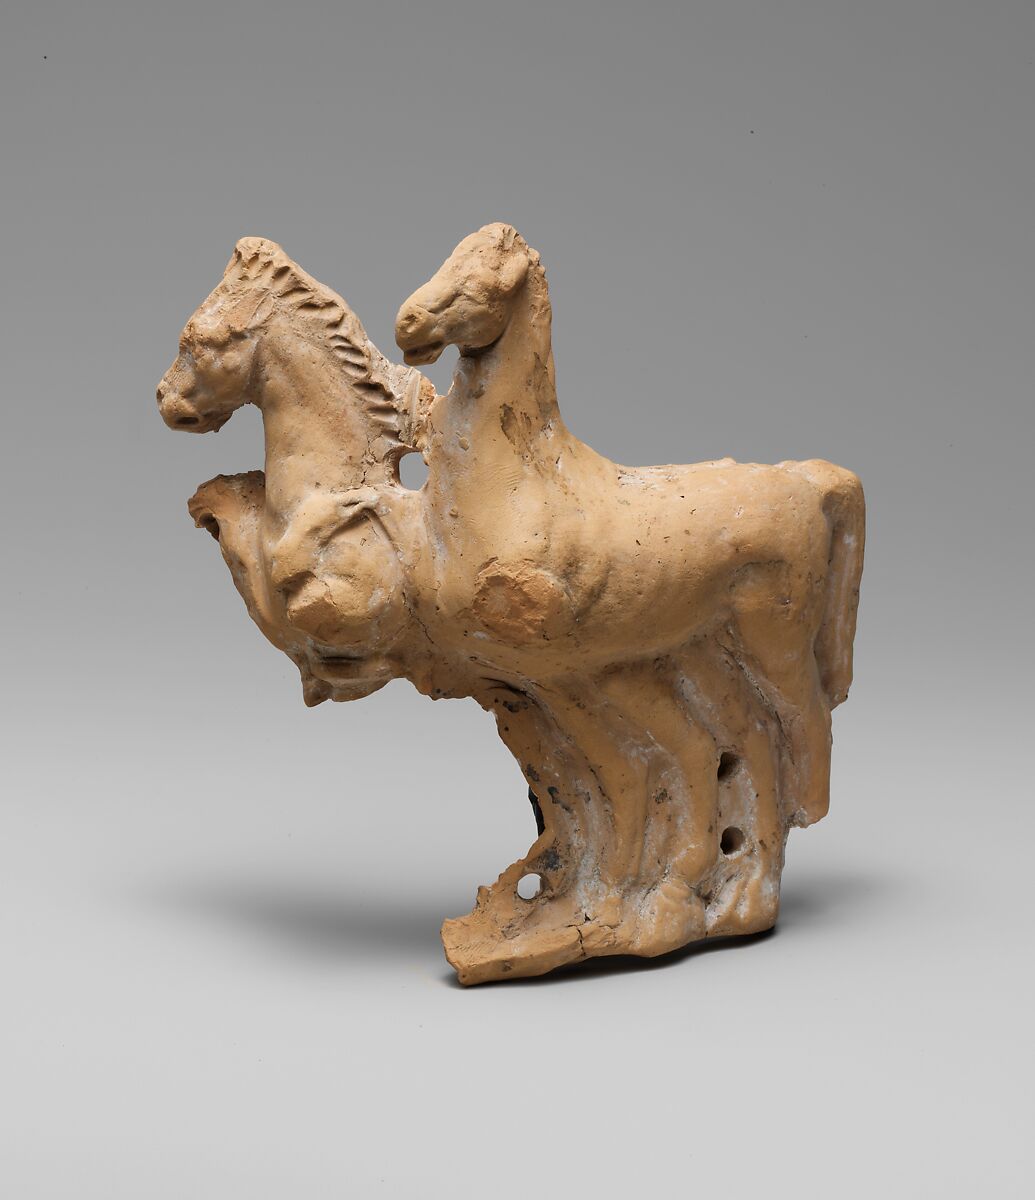 Fragmentary terracotta relief with two horses from a vase, Terracotta, Greek, South Italian (Canosan) 